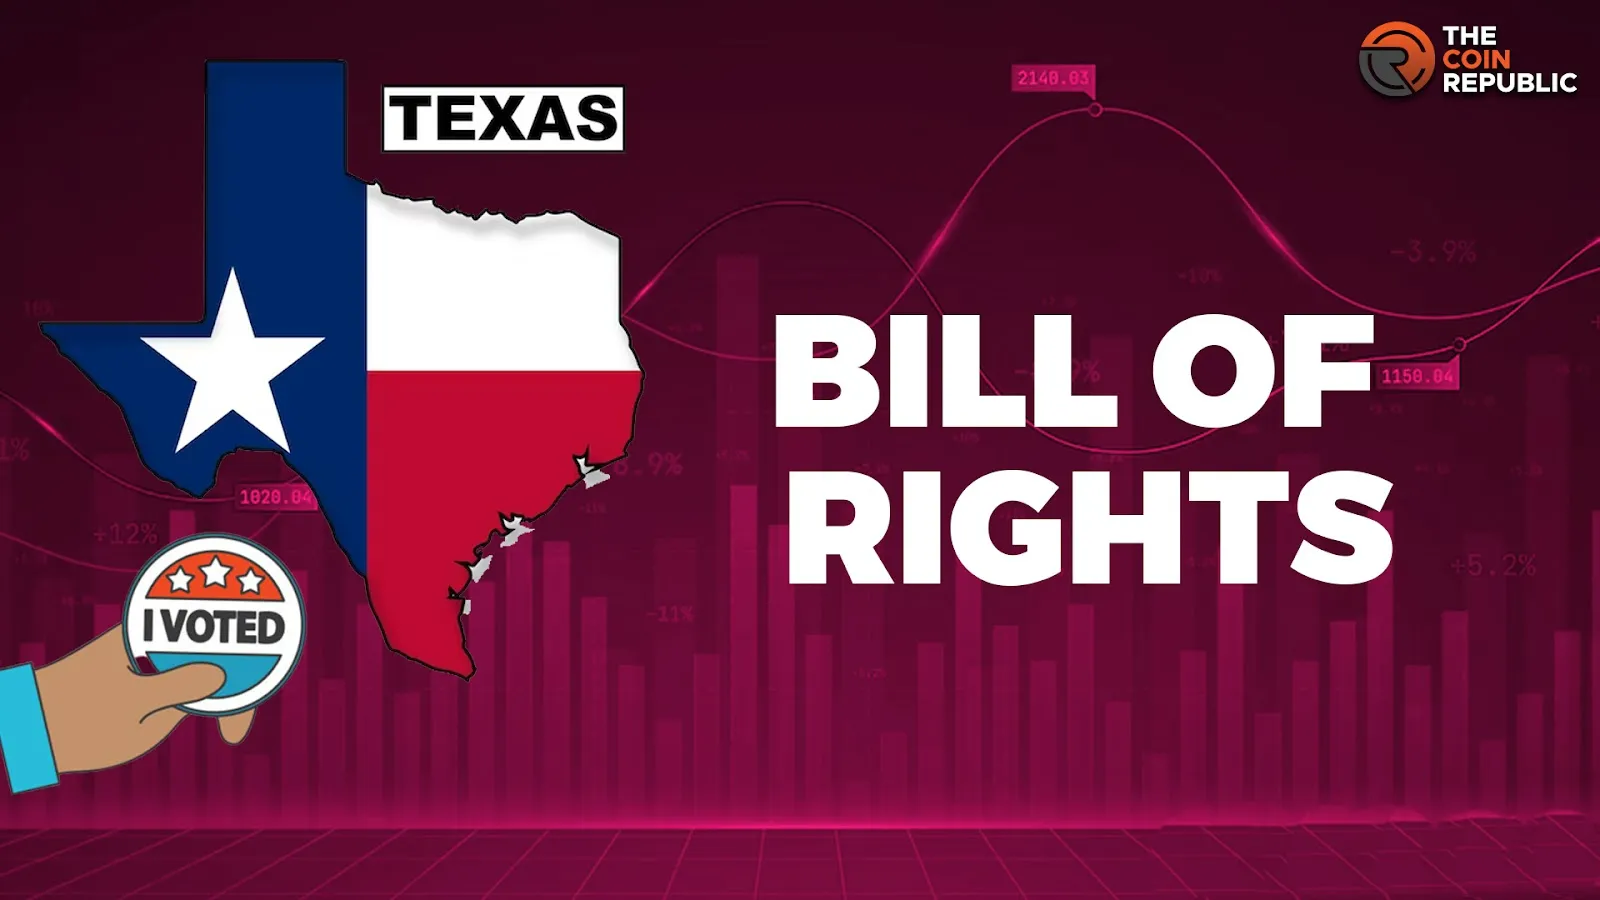 Texas Bill of Rights to Include the Right to Use Digital Assets